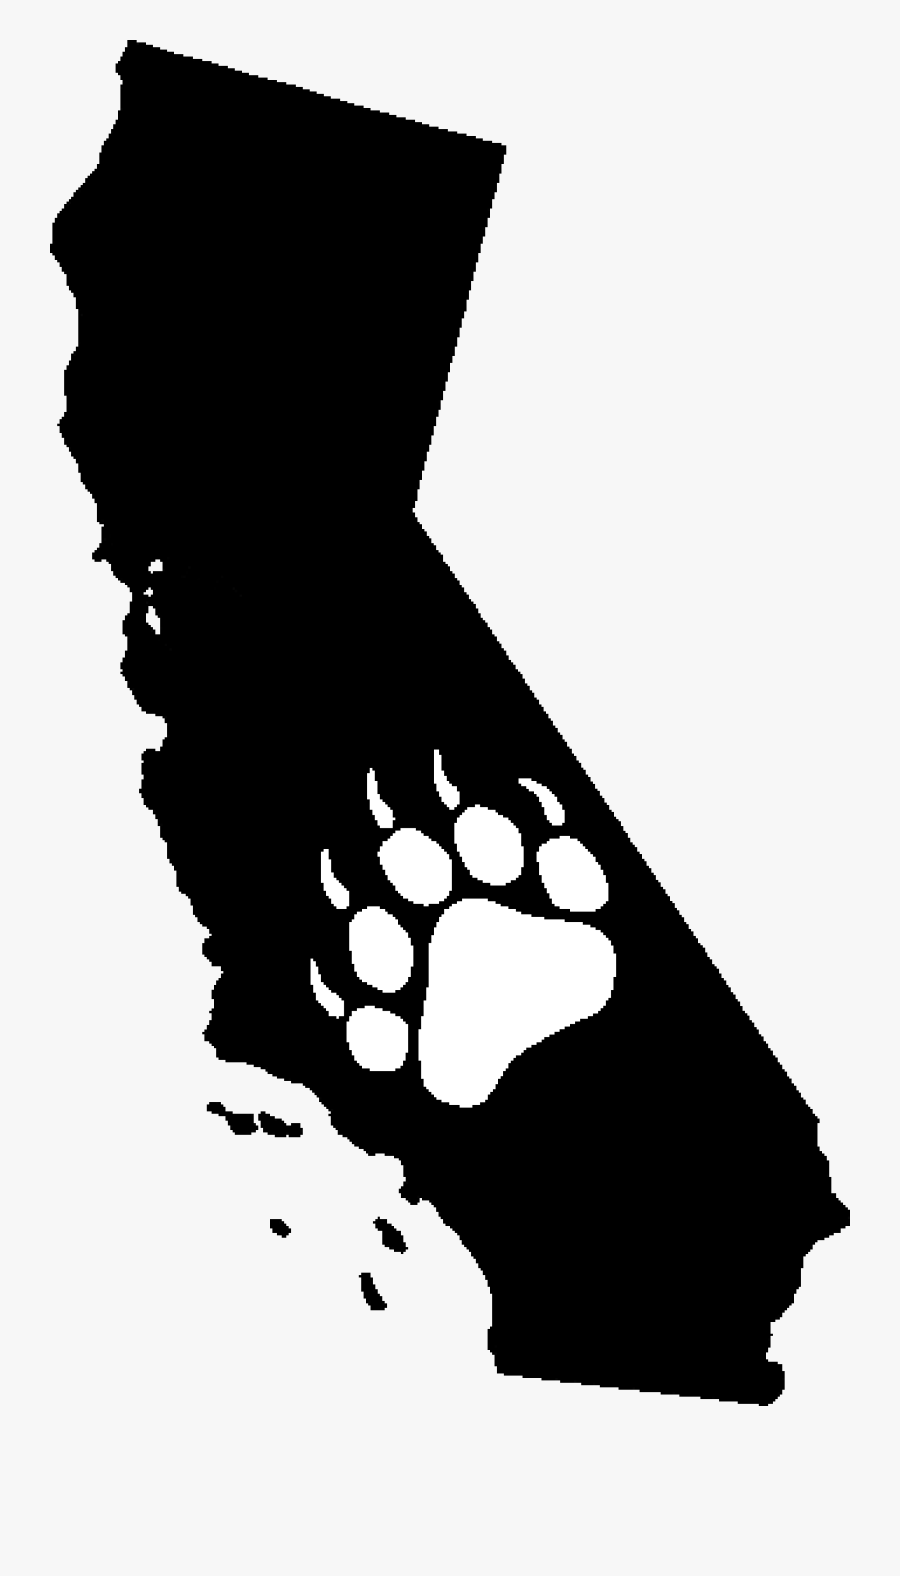 Los Angeles American Black Bear California Grizzly - California 2016 Election Results By County, Transparent Clipart